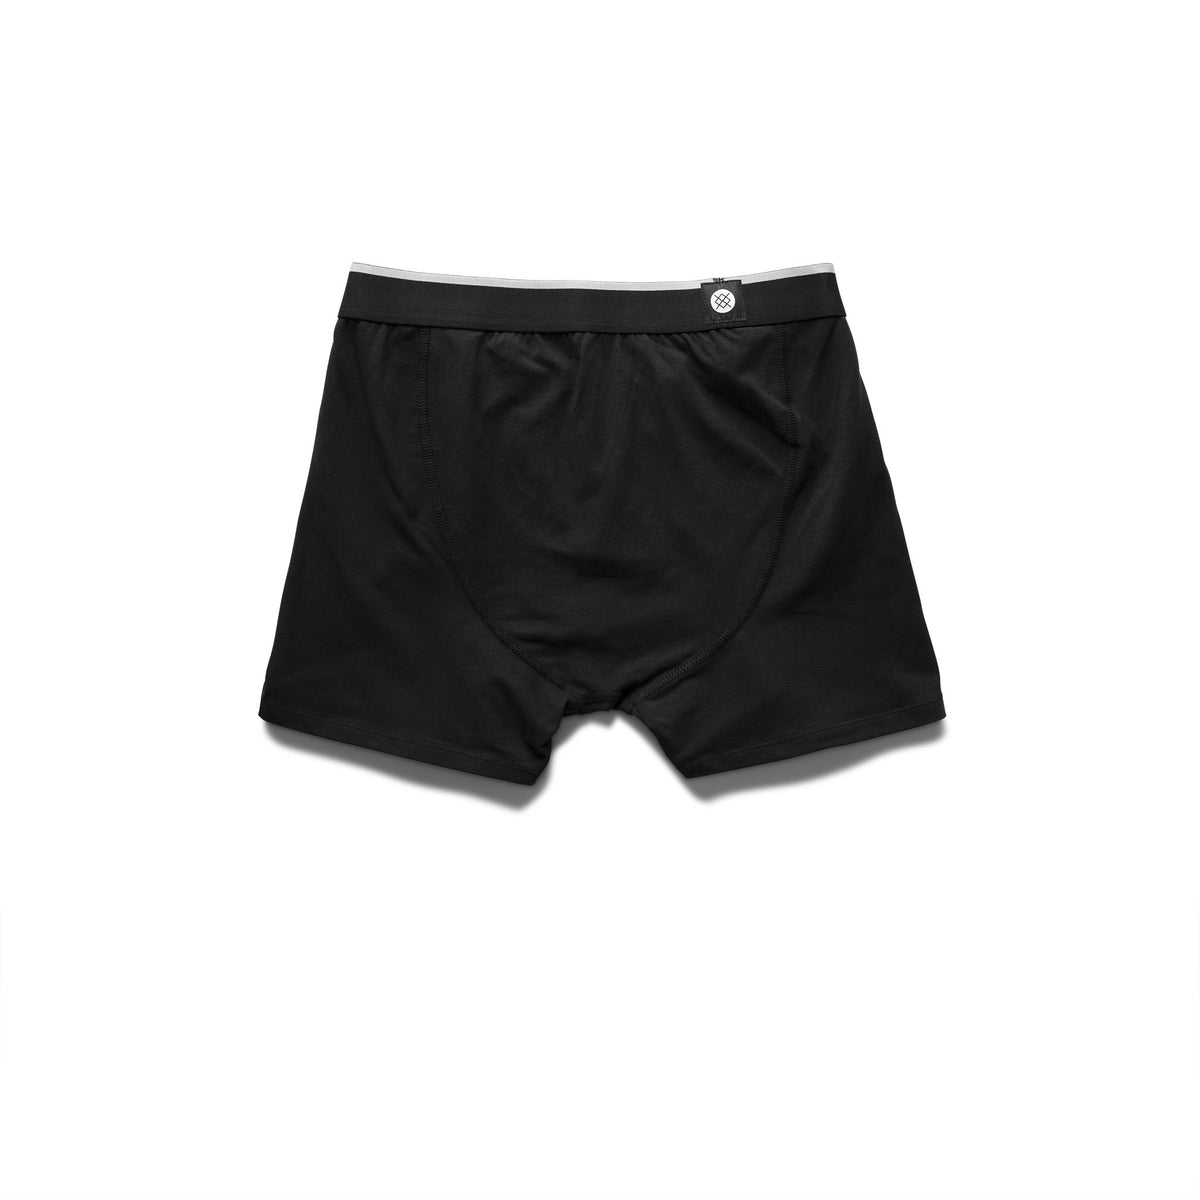 Stance x Reigning Champ boxer breif Style: RC-7145 black – Norwood